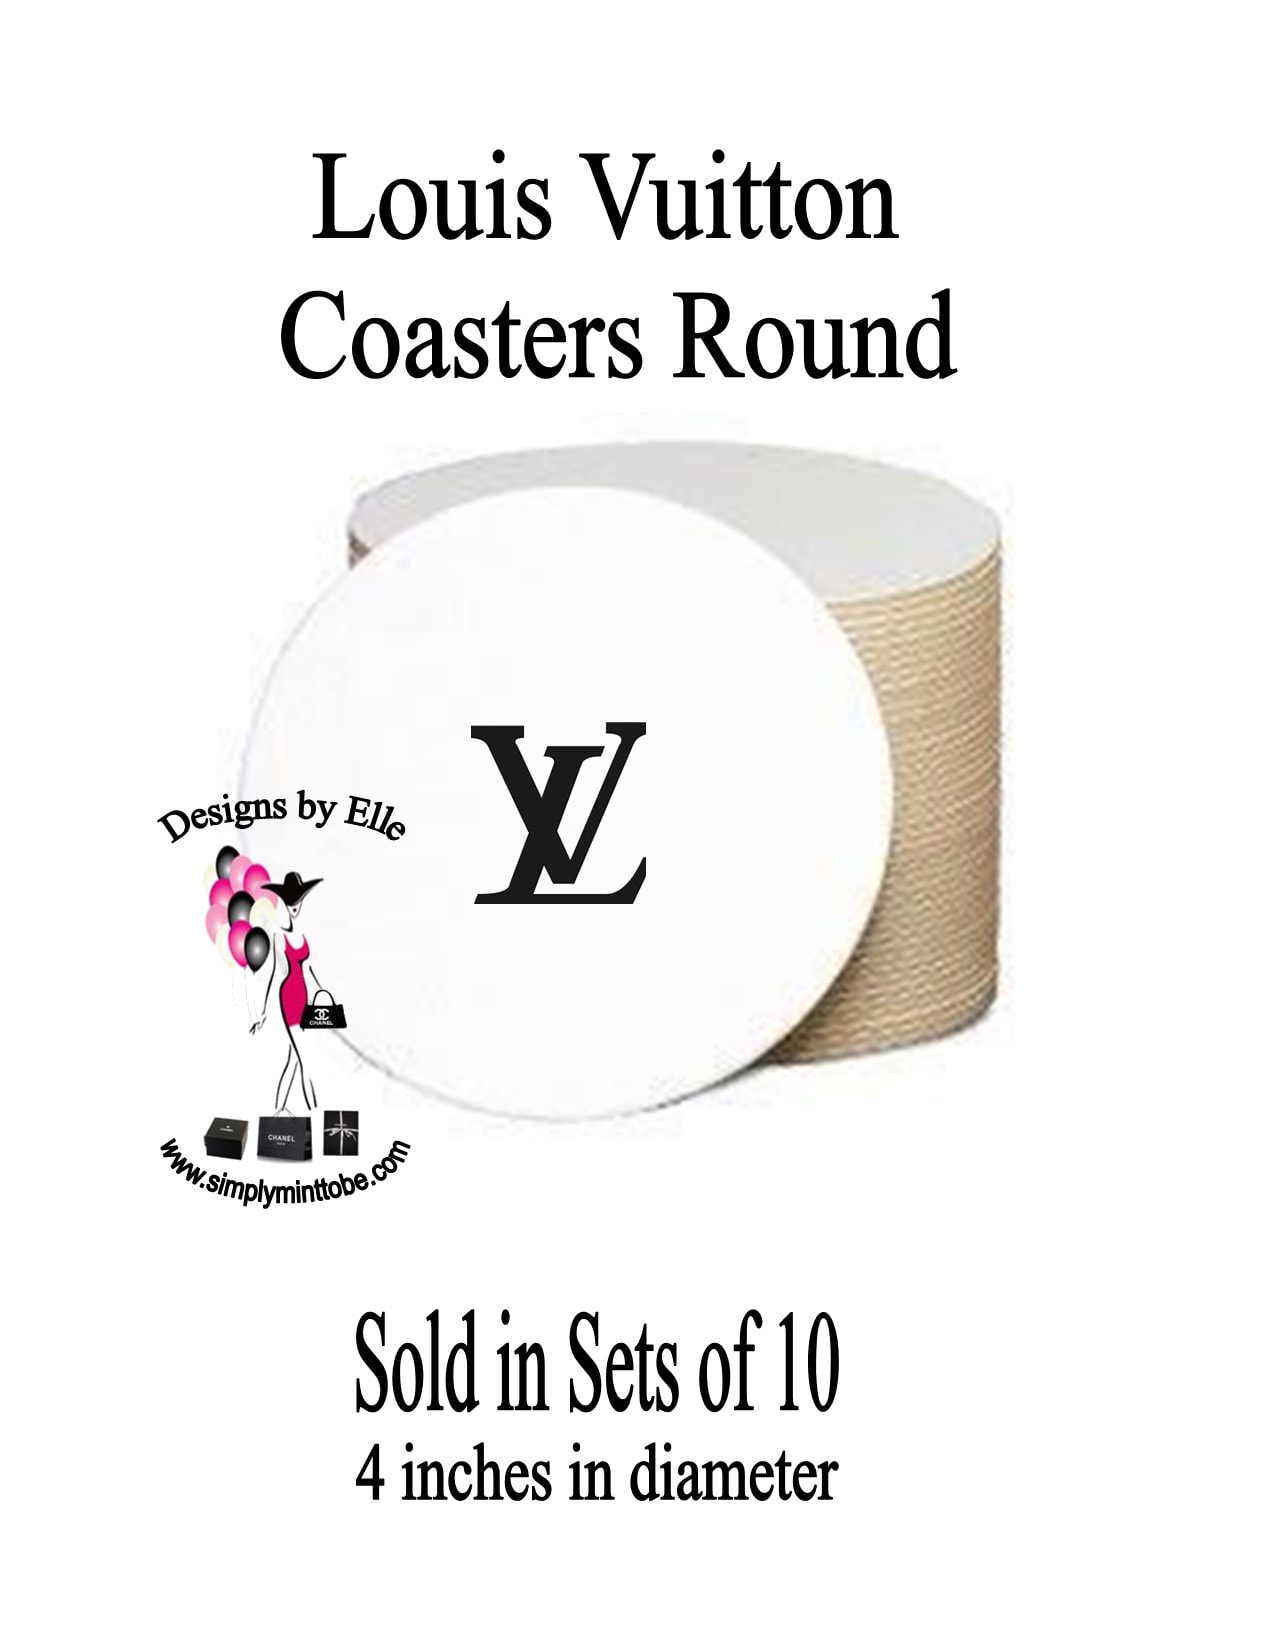 Shop Kitchenware Shipping Included Louis Vuitton x Kitchenware Monogram  fluo coasters Gifts for V Day, Boyfriend, Girlfriend